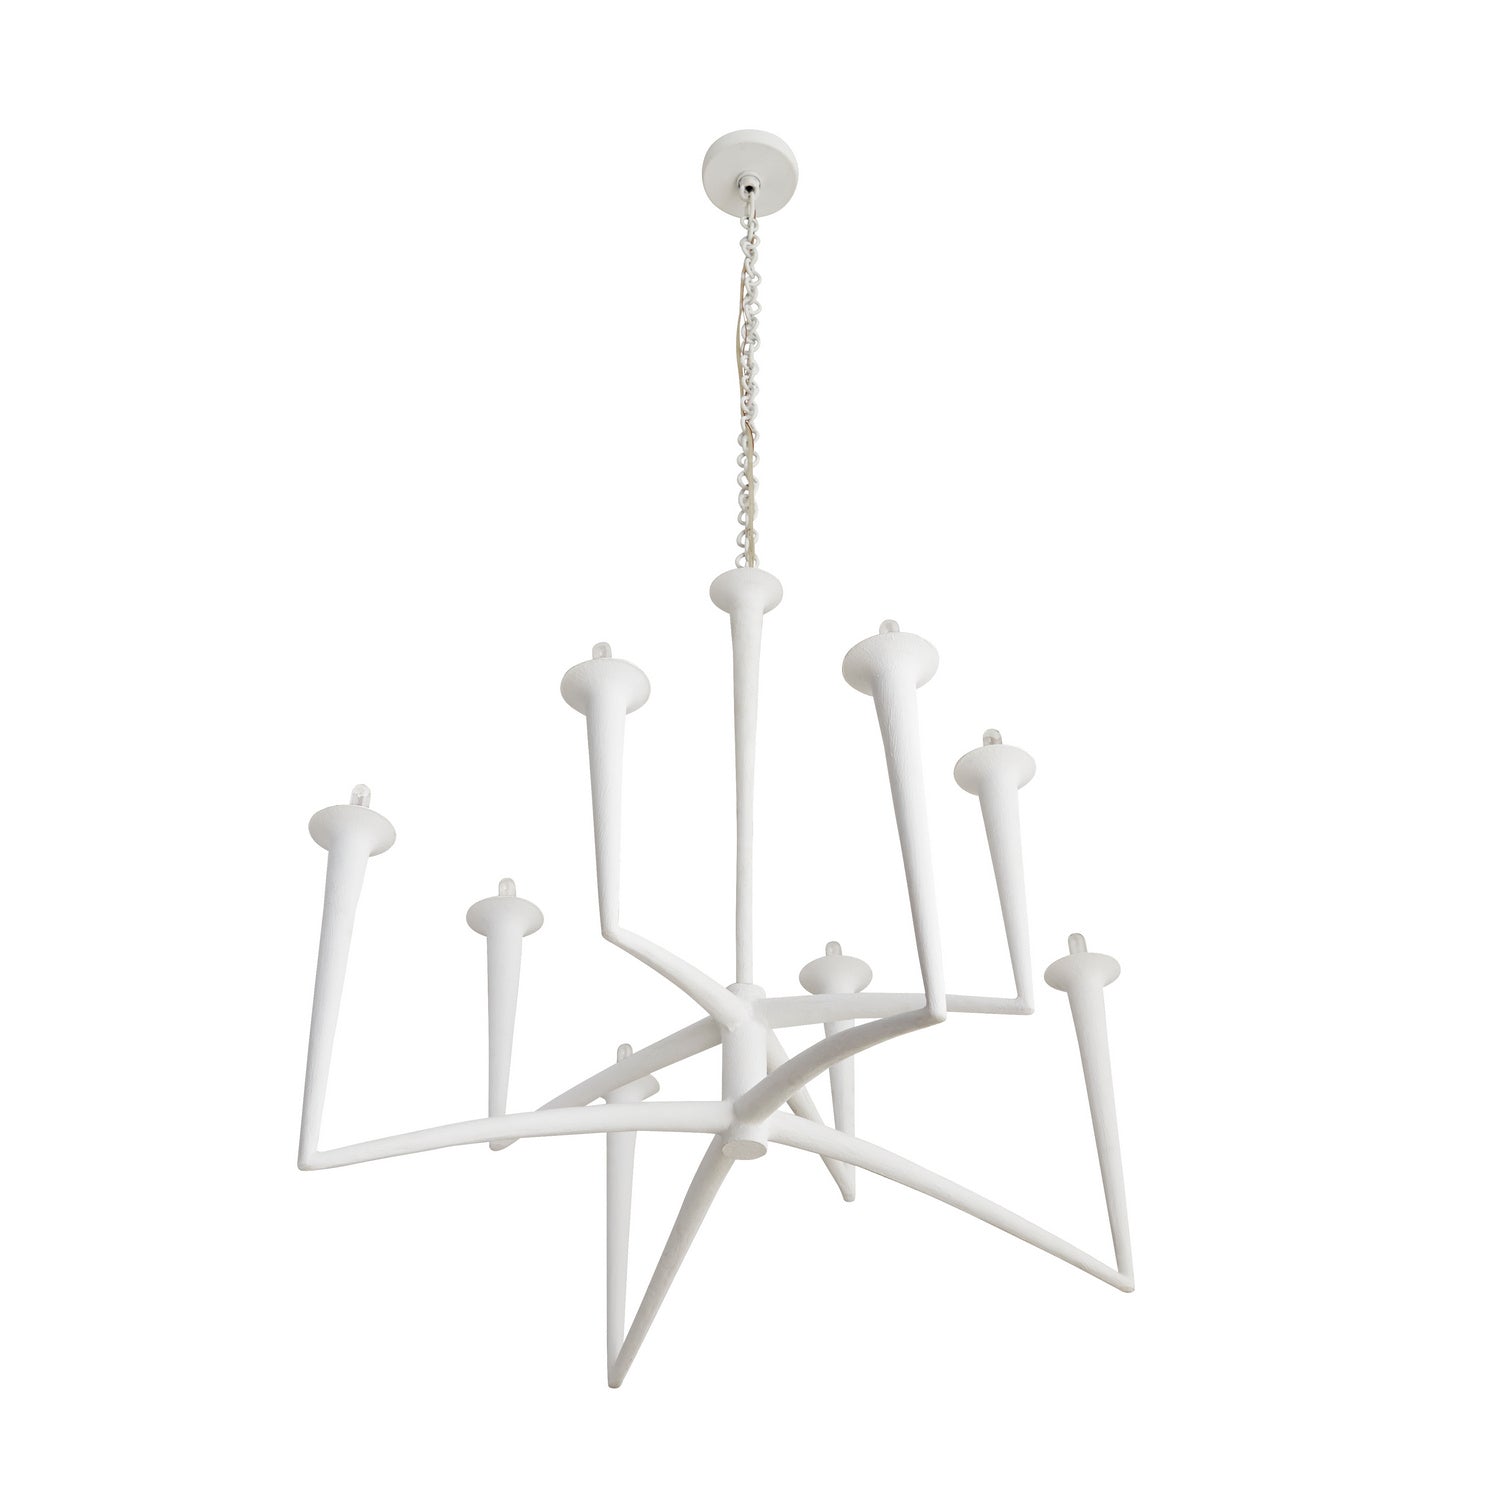 Eight Light Chandelier from the Isma collection in White Gesso finish